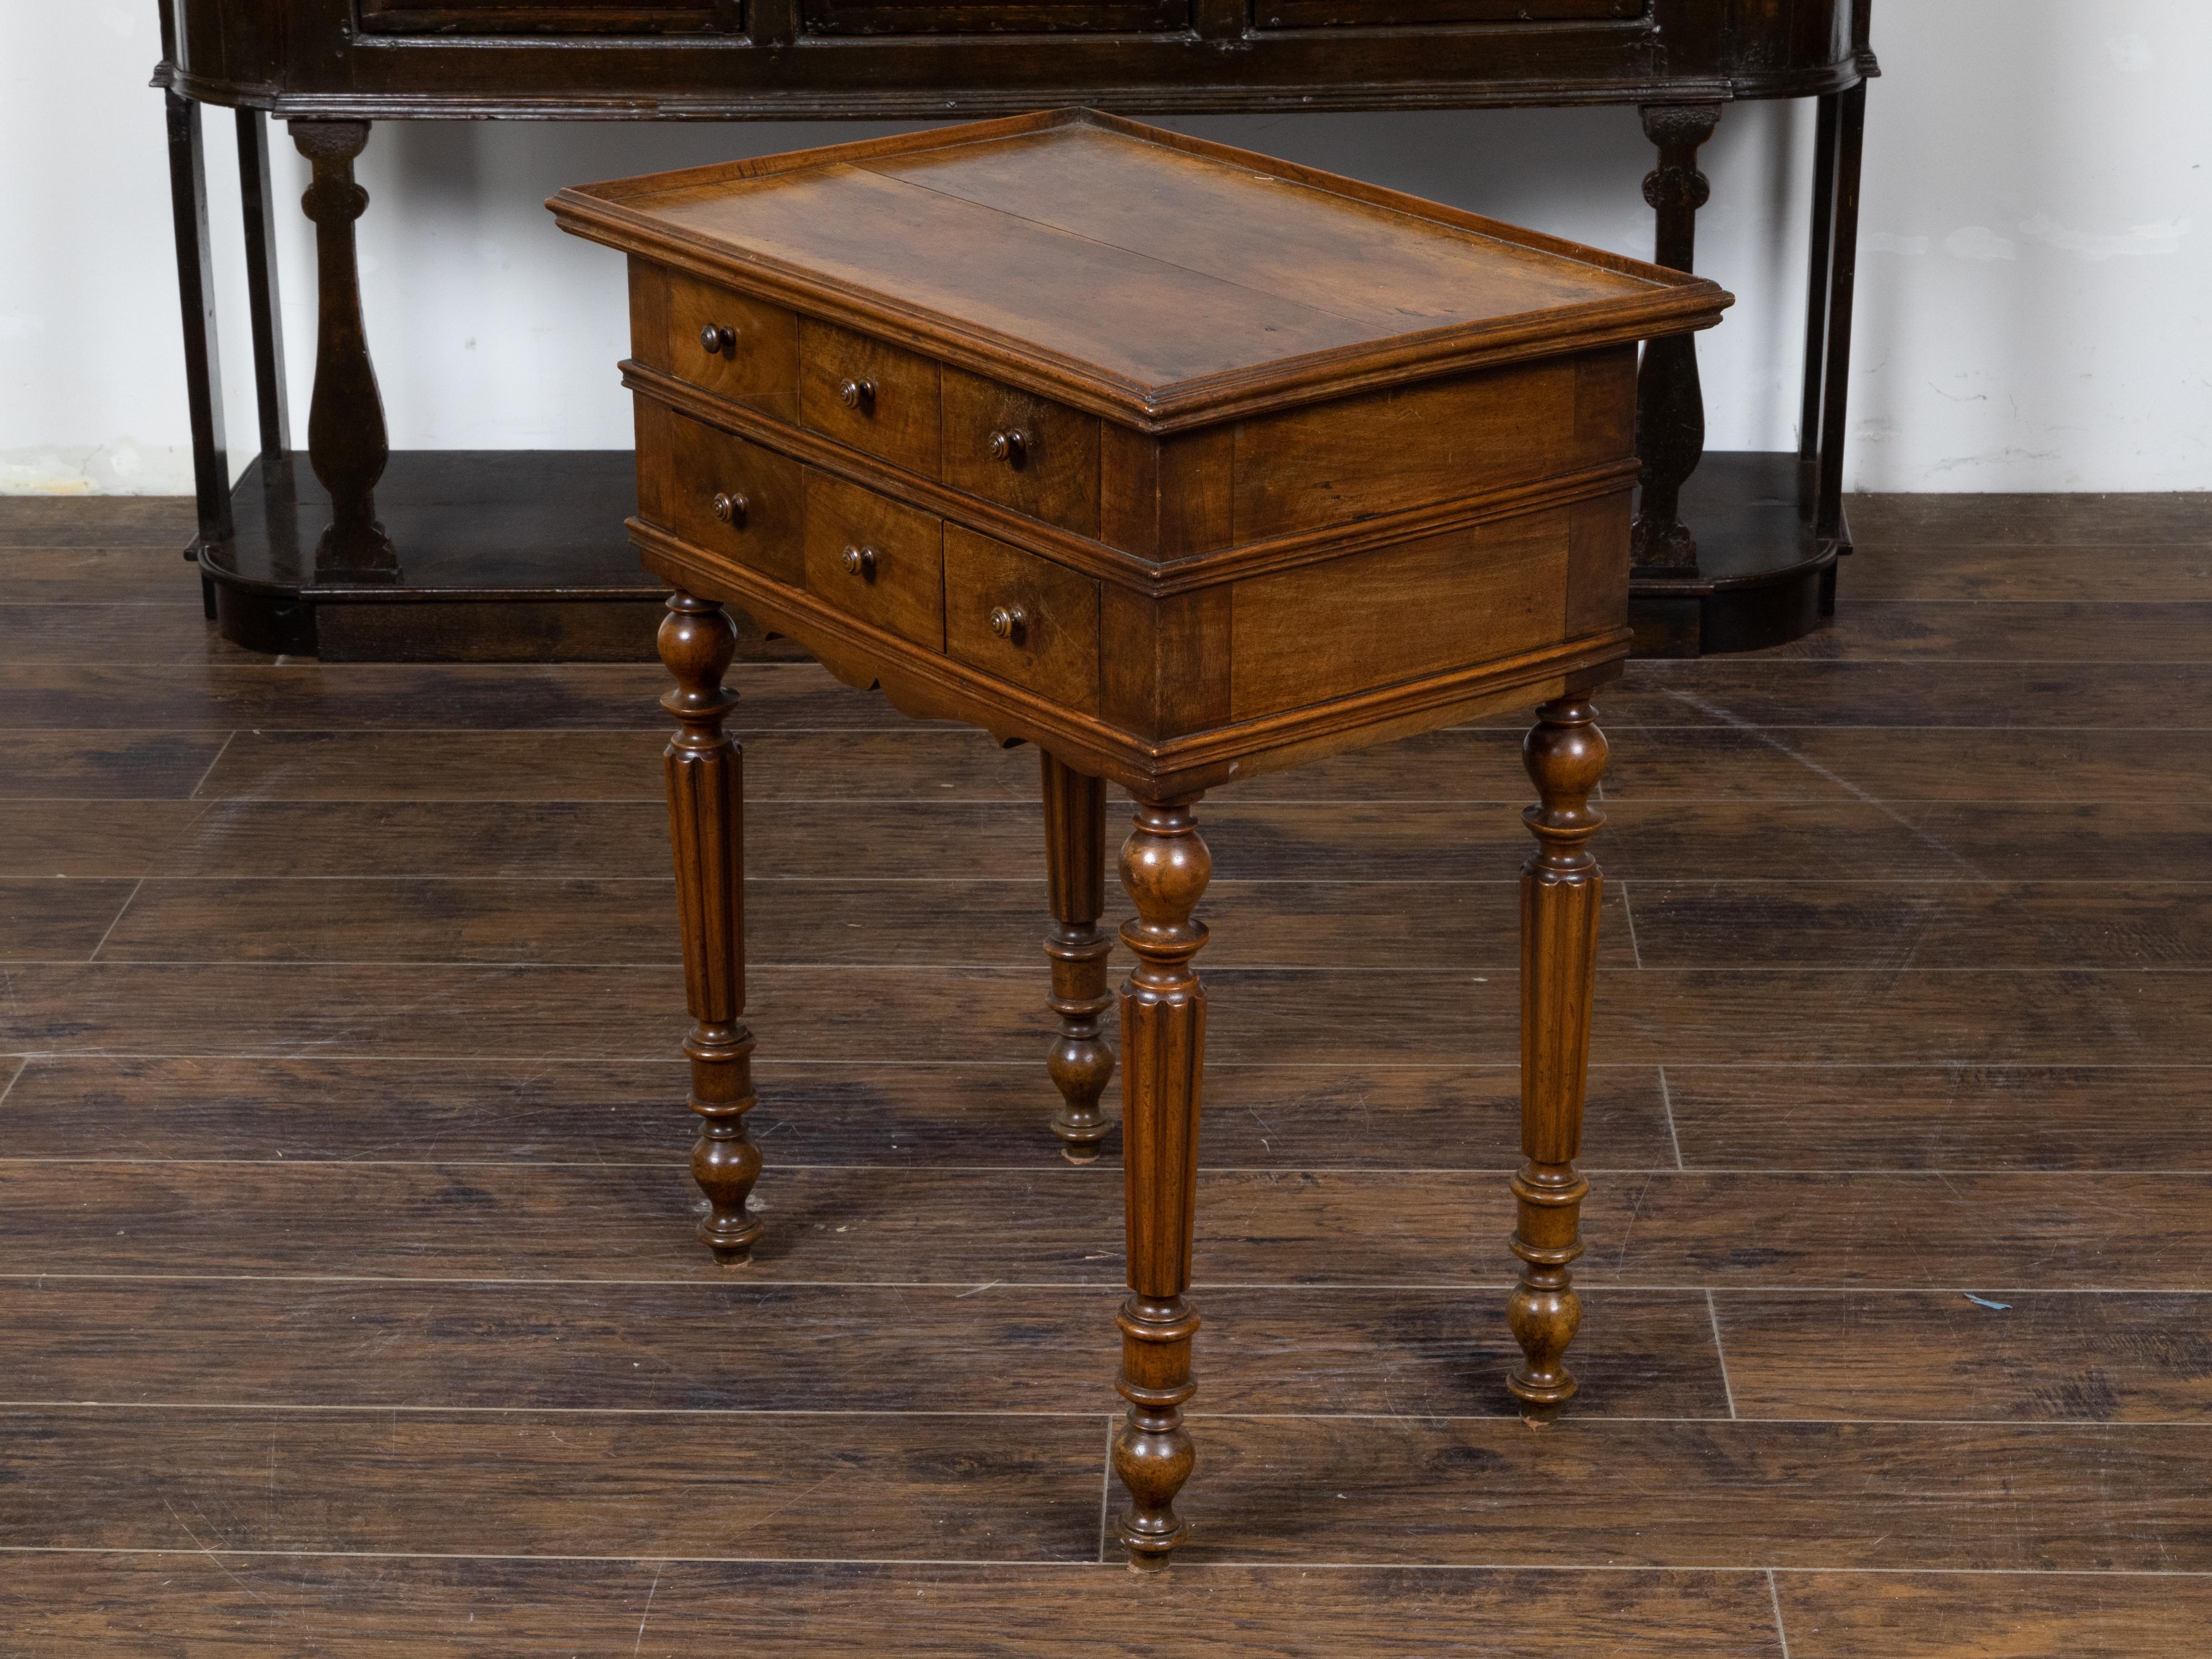 A French walnut side table from the 19th century, with tray top, six drawers, carved apron and four fluted legs. Created in France during the 19th century, this walnut side table features a rectangular planked tray top sitting above a perfectly